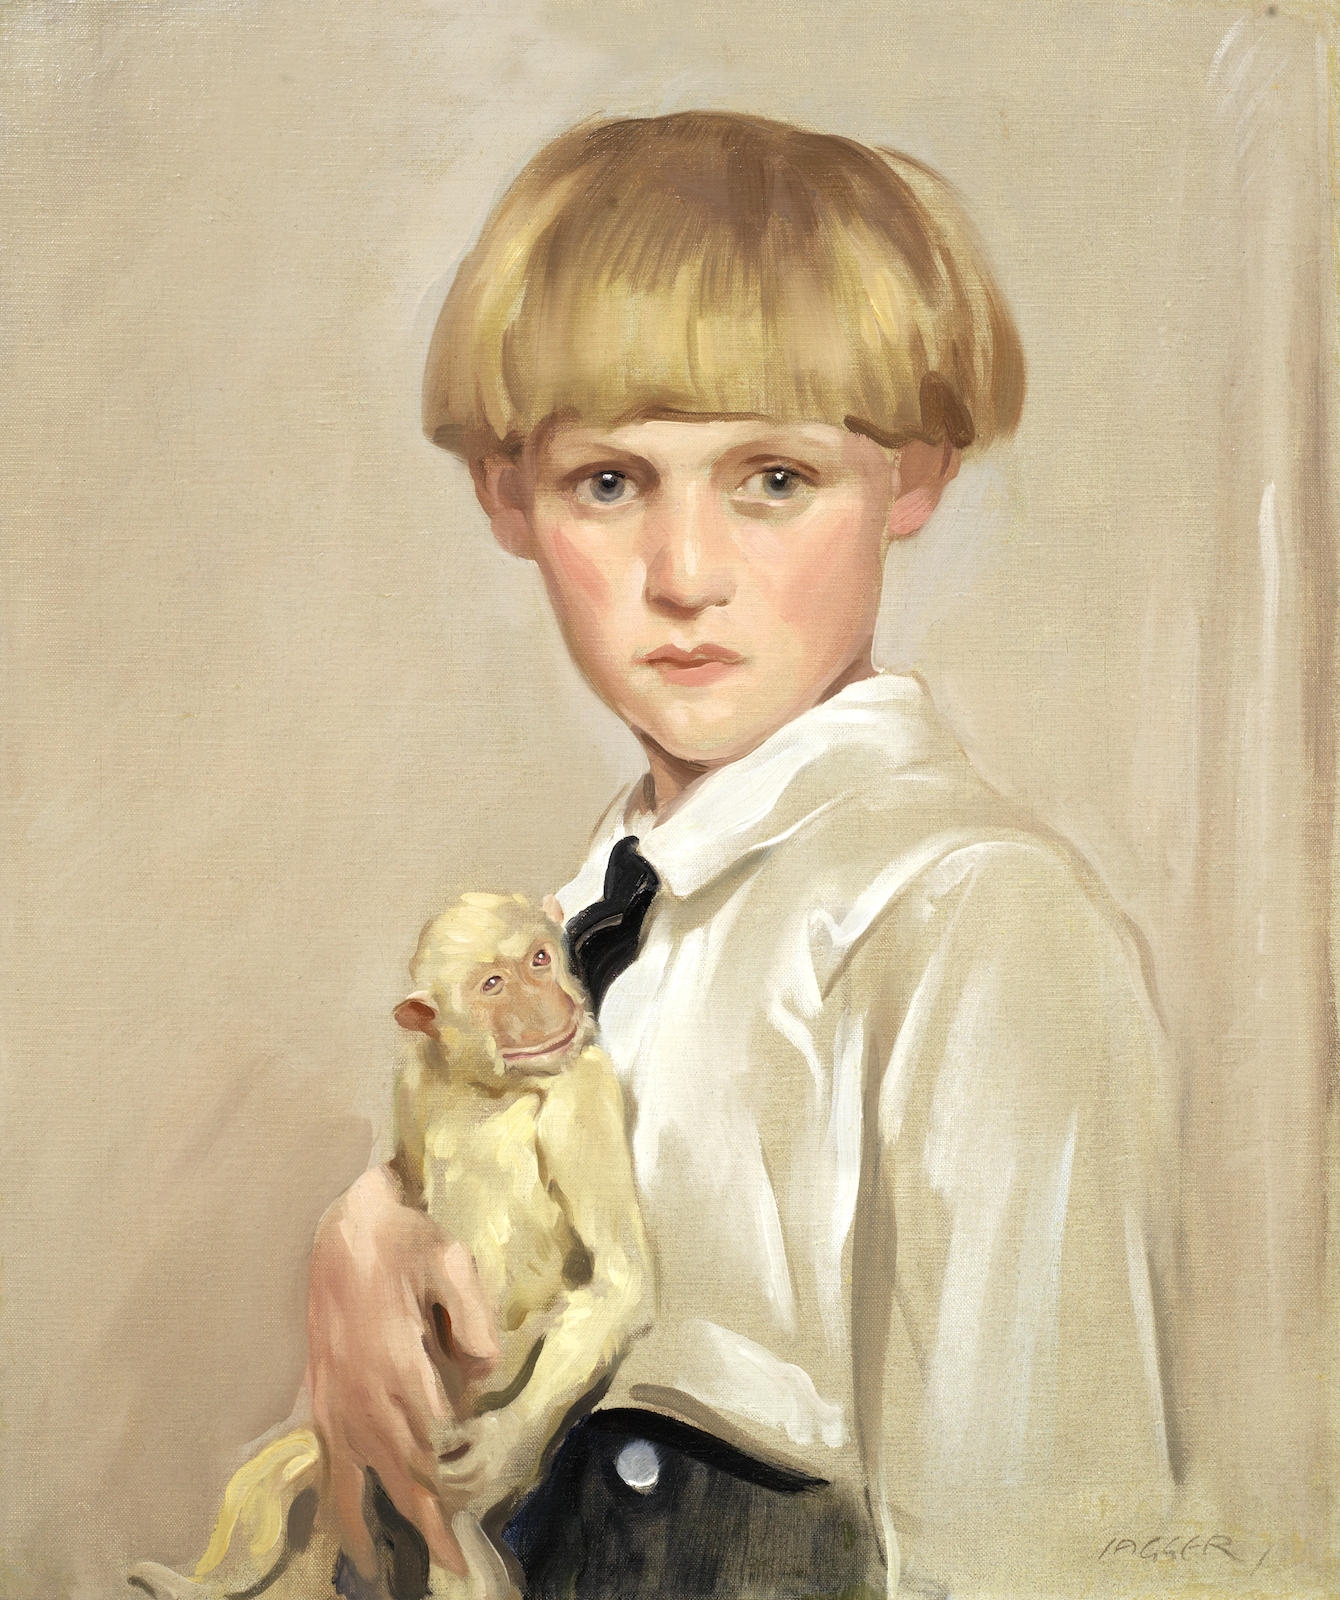 Portrait of a boy with his monkey by David Jagger